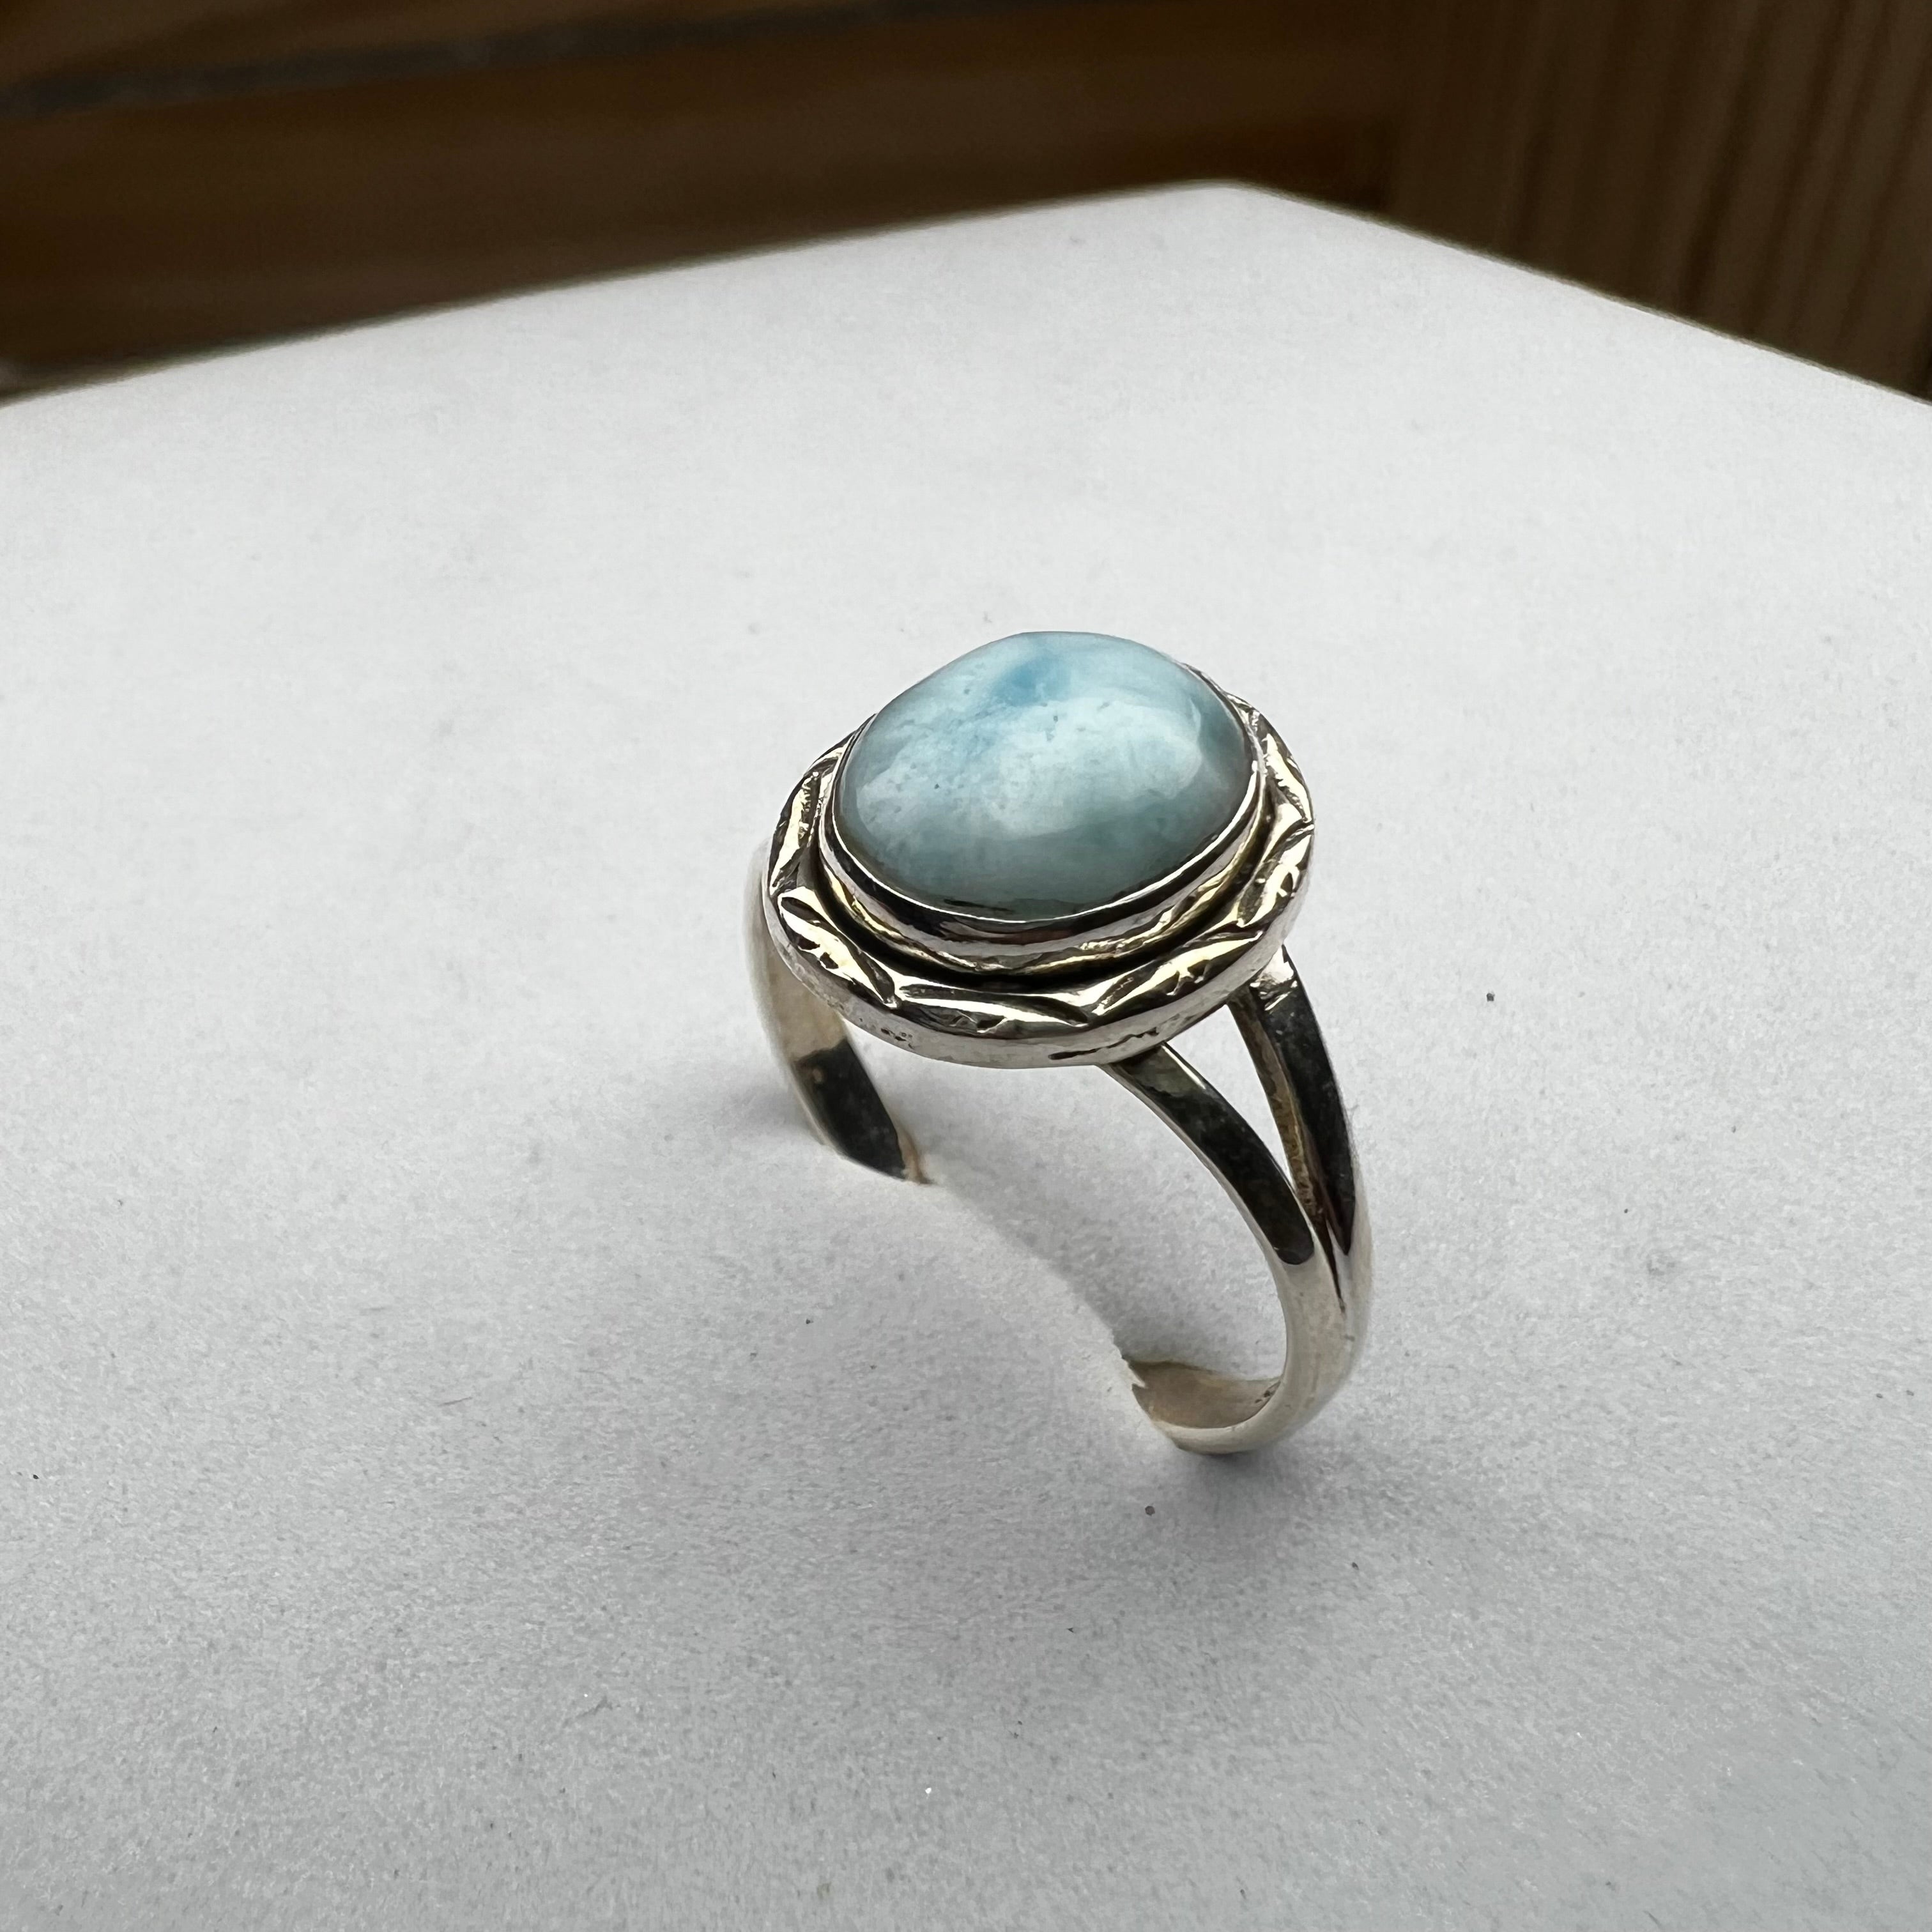 HANDCRAFTED LARIMAR RING IN
SILVER 925 (SIZE 8)